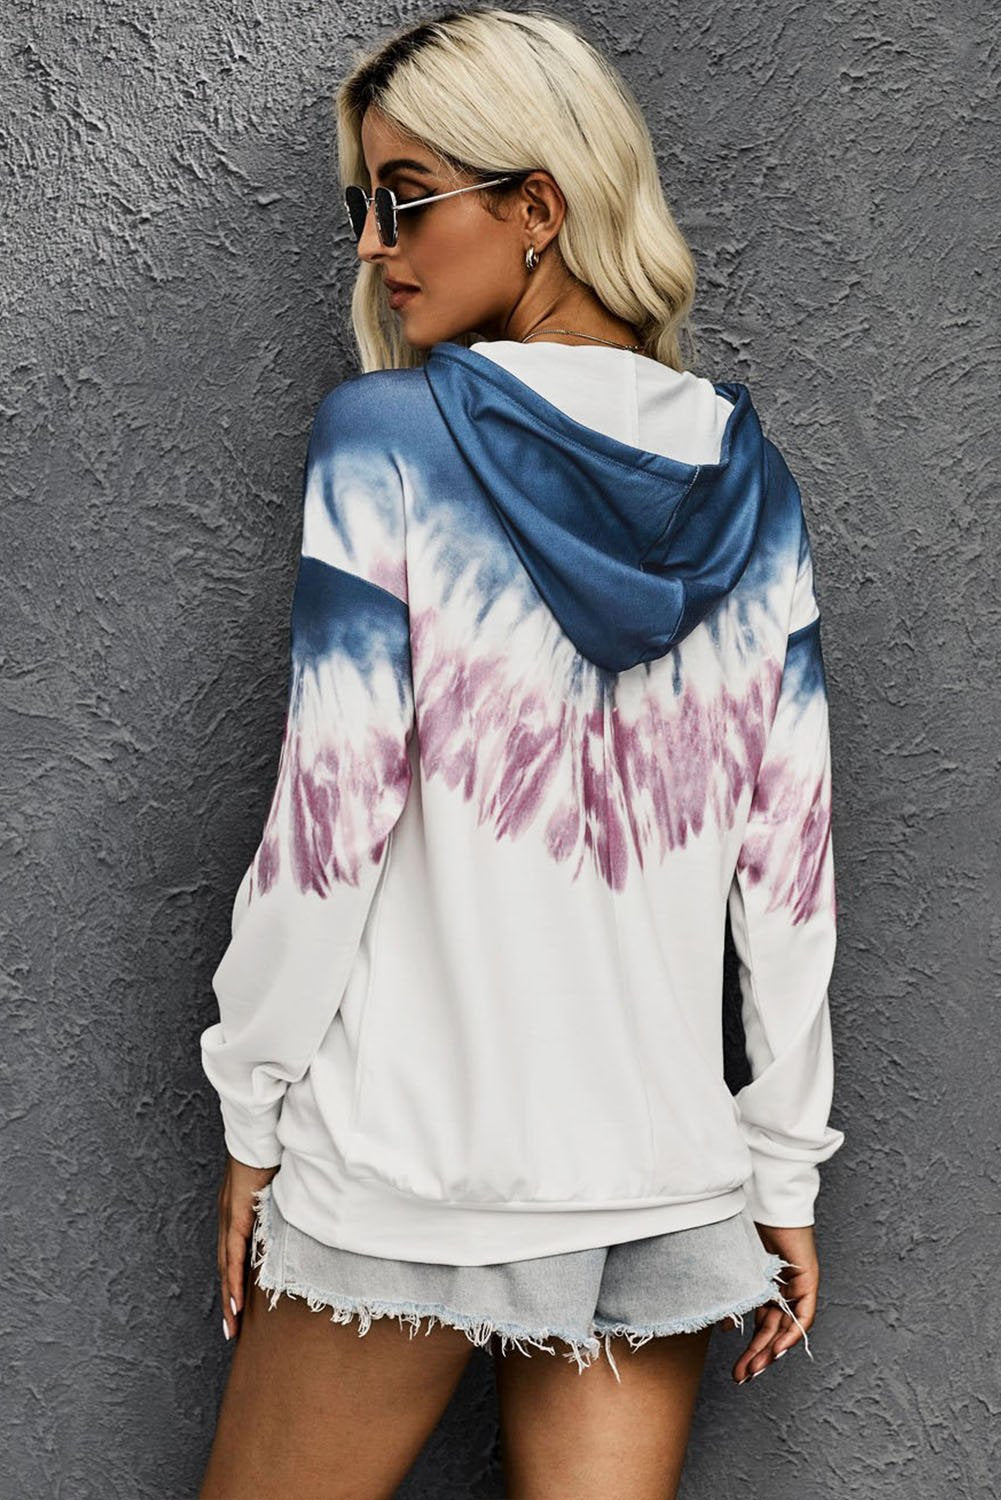 Picture of a Radiant Sunset Tie-Dye Hoodie in pink and blue back view